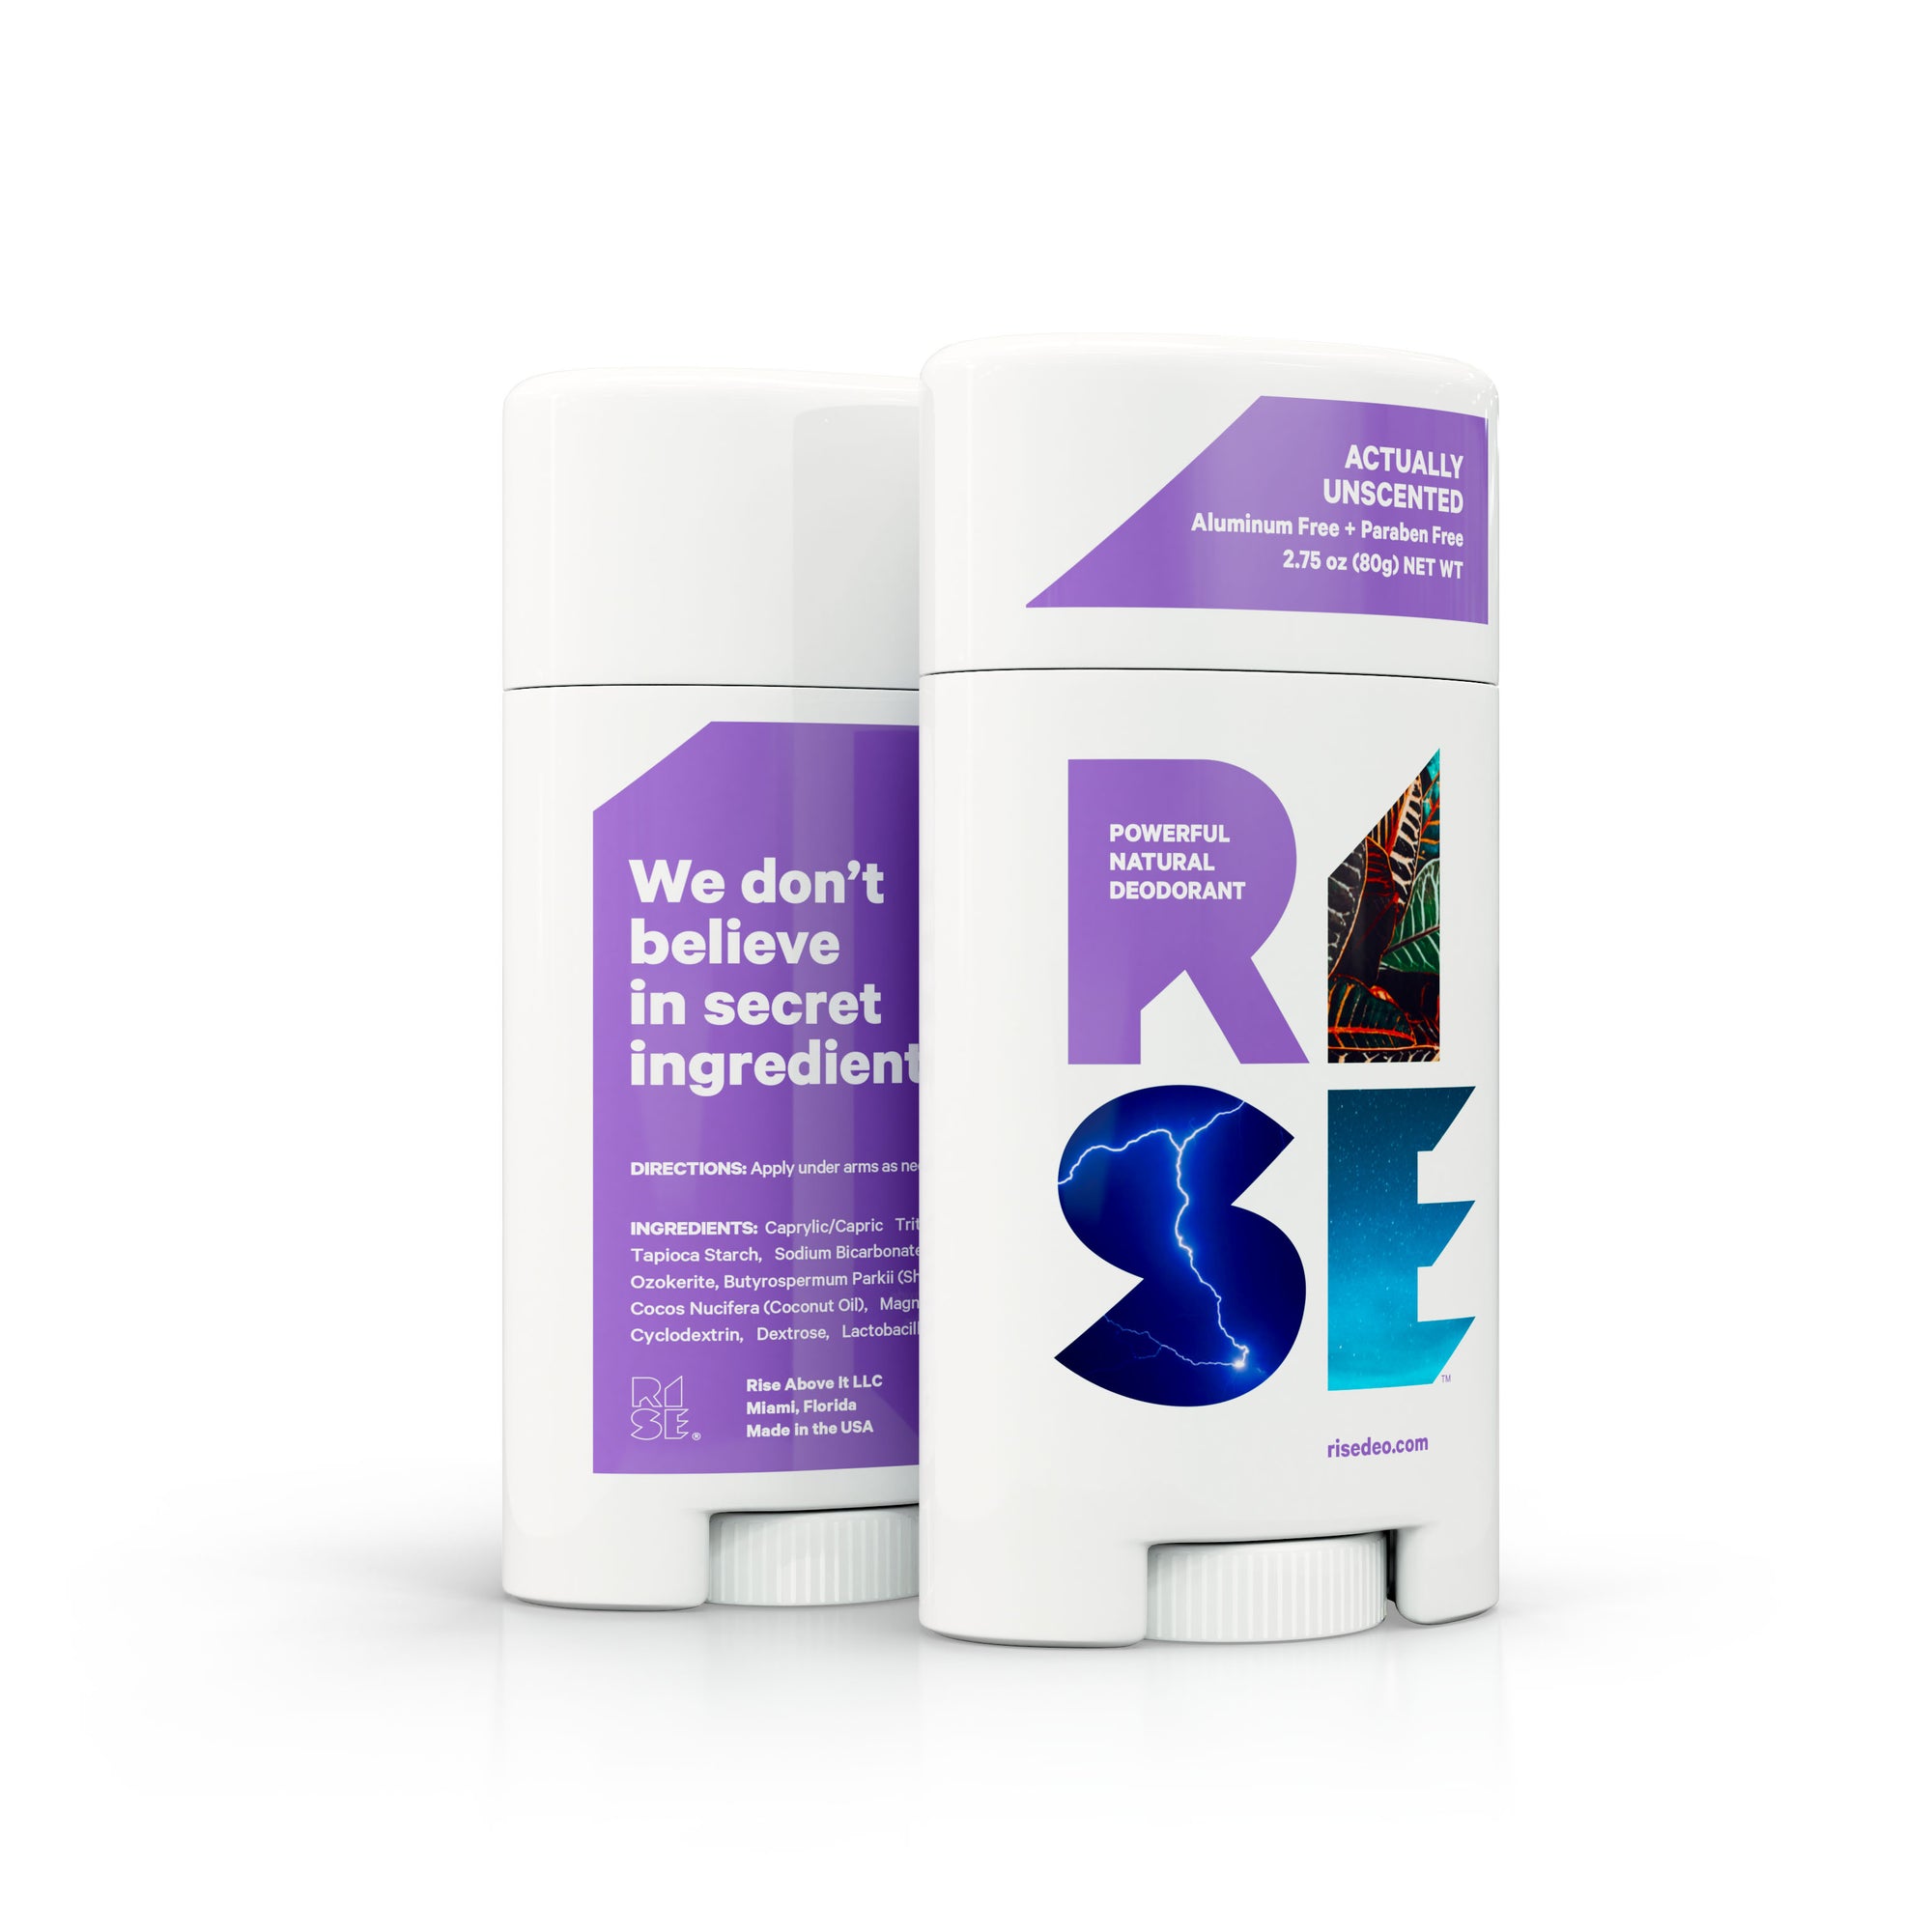 RISE - Powerful natural deodorant - Actually Unscented